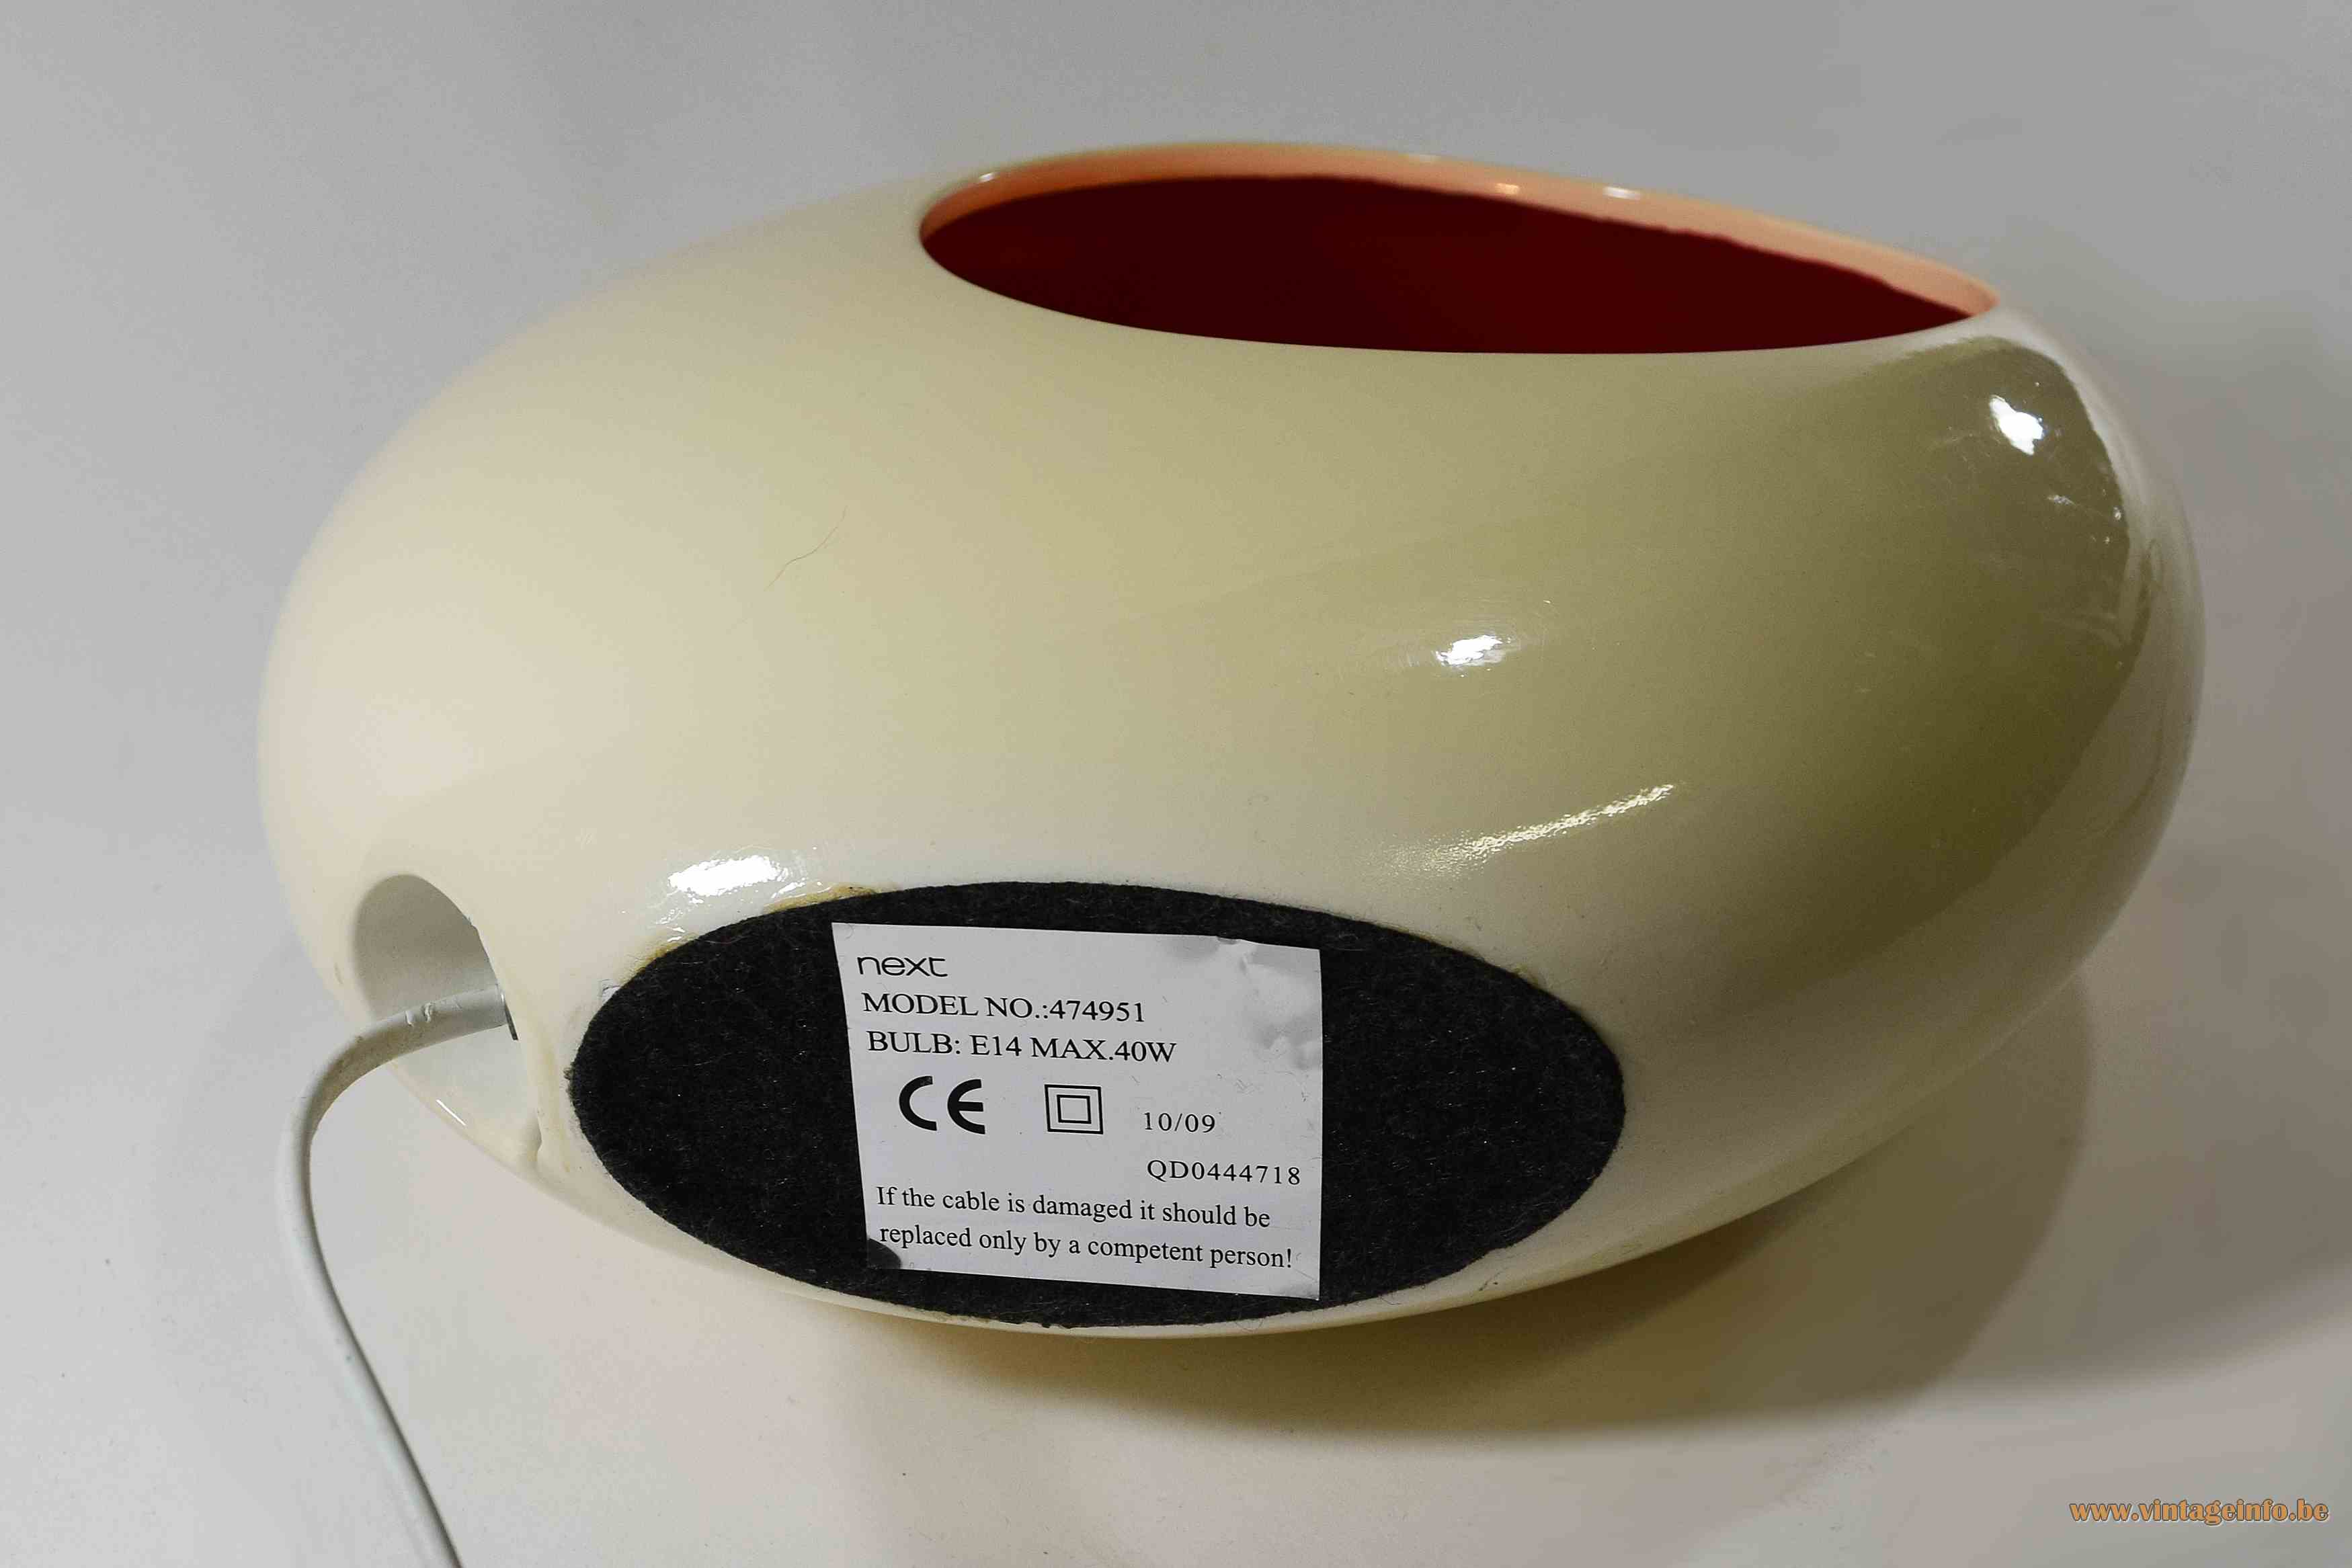 Next ceramic table lamp oval round beige lampshade maroon inside 1990s 2000s United Kingdom label